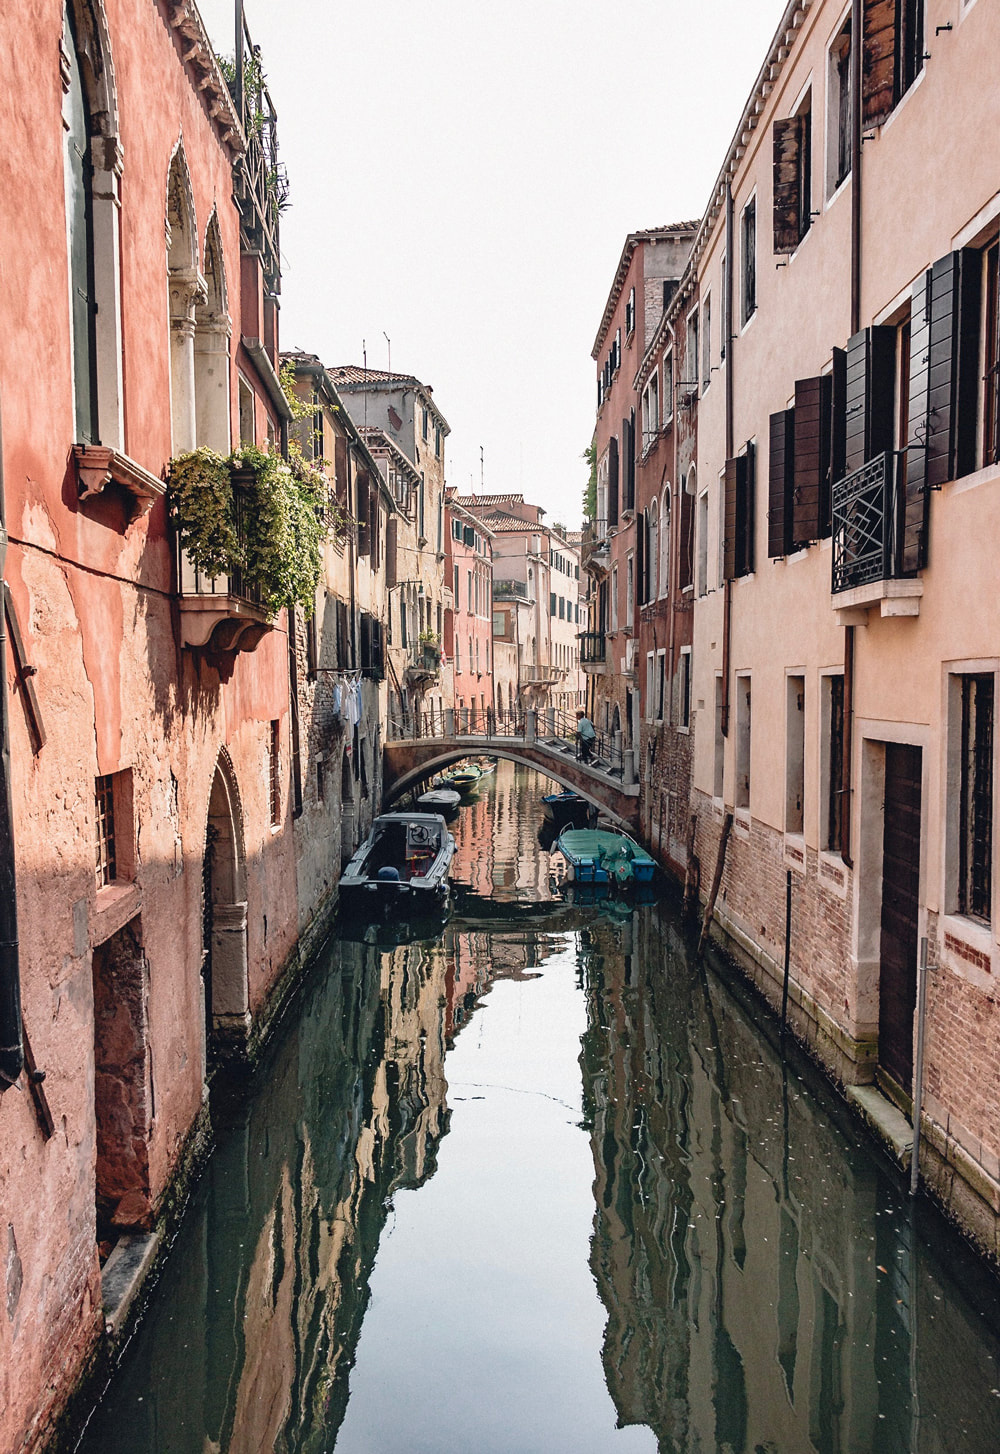 Designer Cities For Your Bucket List. The canals in Venice, Italy.